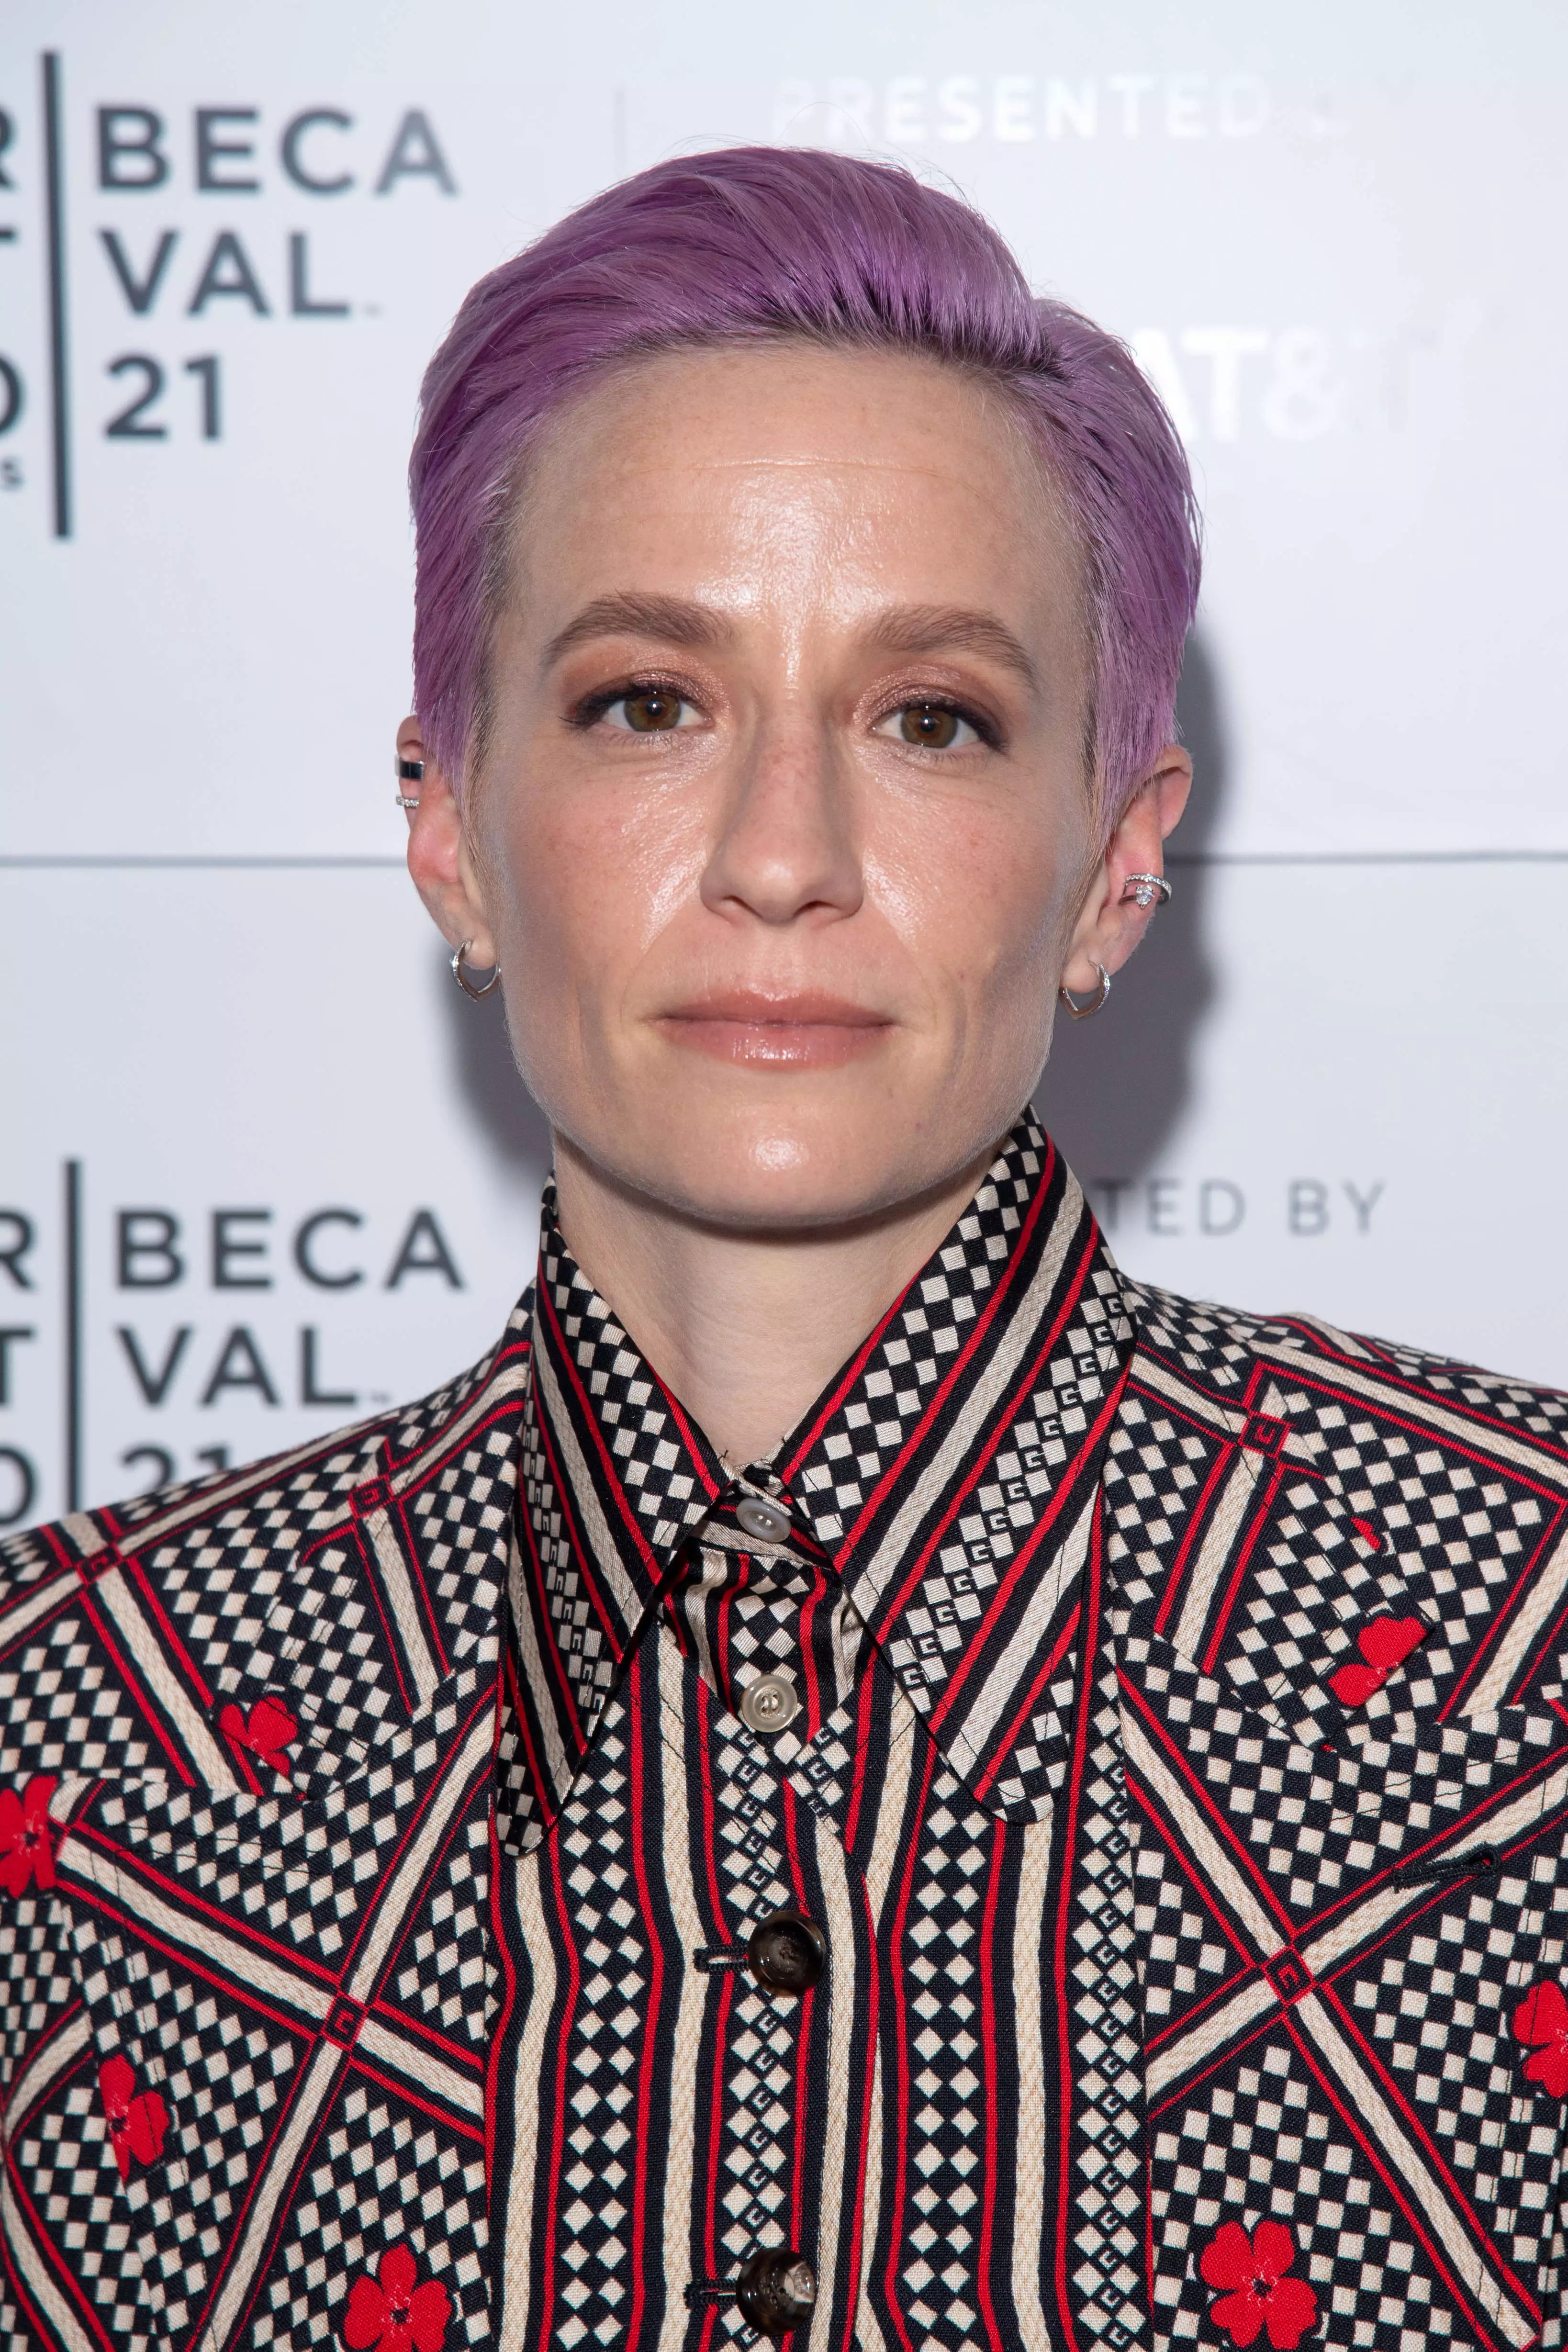 Footballer Megan Rapinoe will be one of the VS Collective (